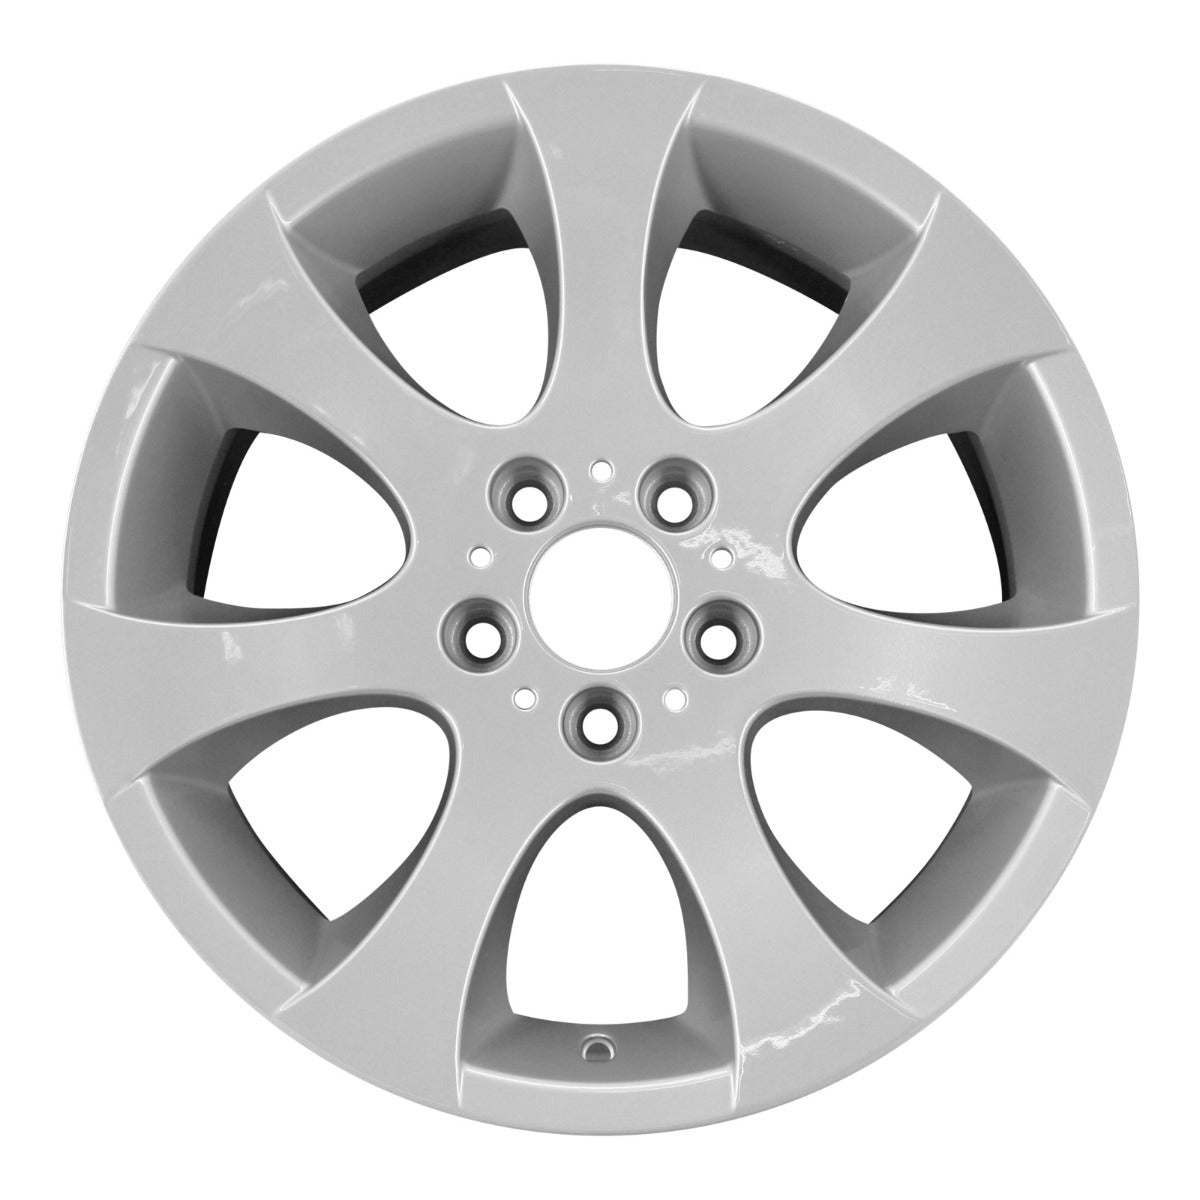 2011 BMW 328i New 18" Front Replacement Wheel Rim RW59586S